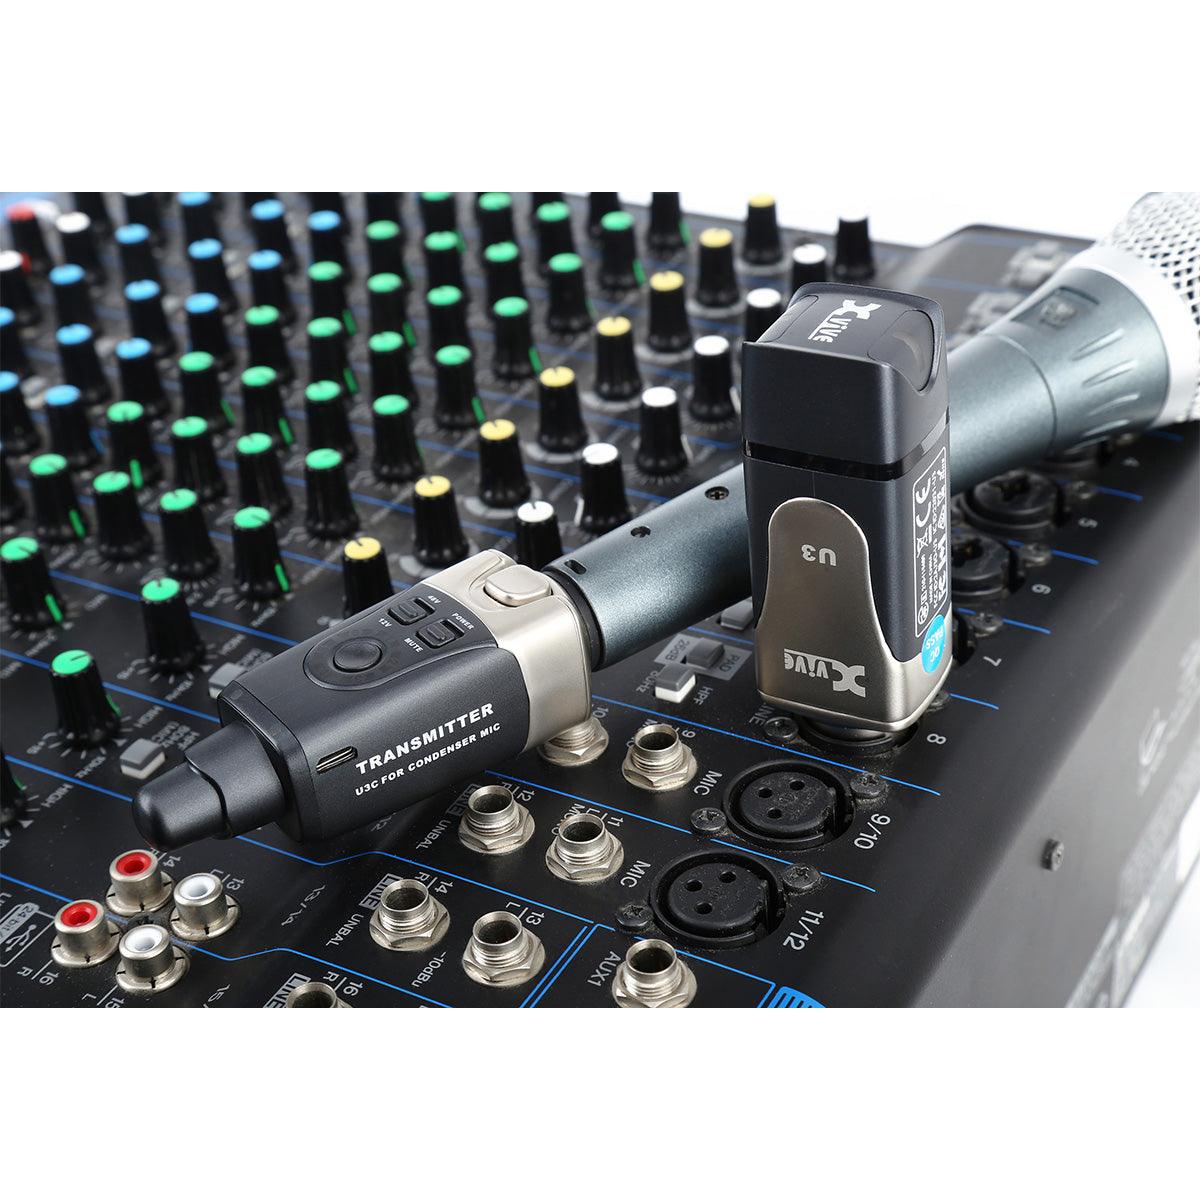 Xvive Condenser Microphone Wireless System - DY Pro Audio